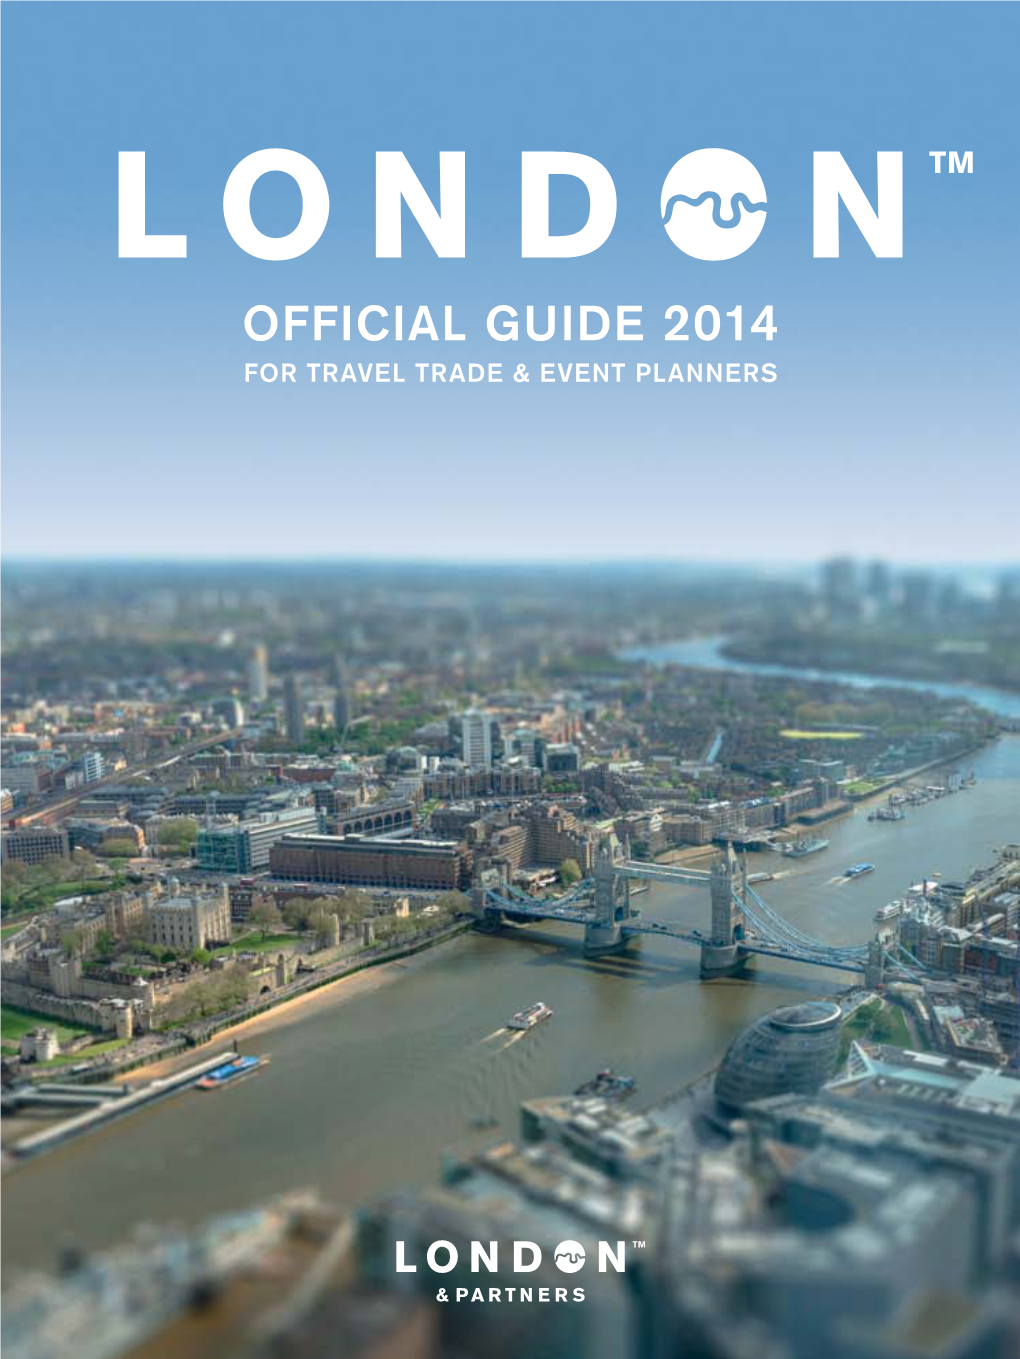 London Official Guide 2014 for Travel Trade & Event Planners